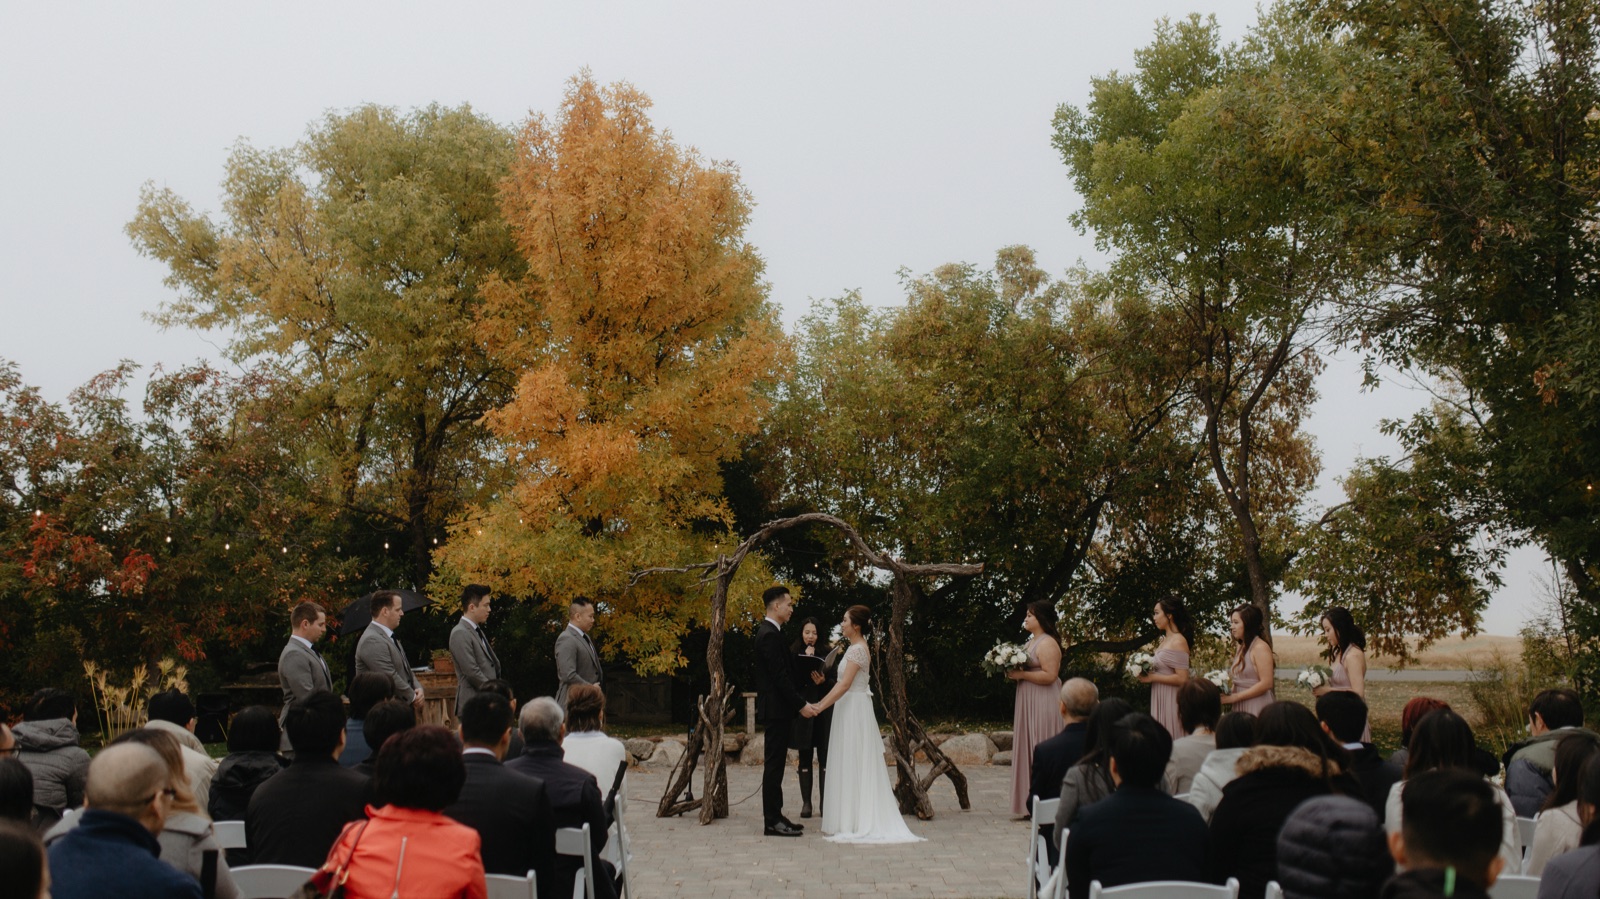 Unique ceremony twisted wooden arch for a fall wedding south of Calgary